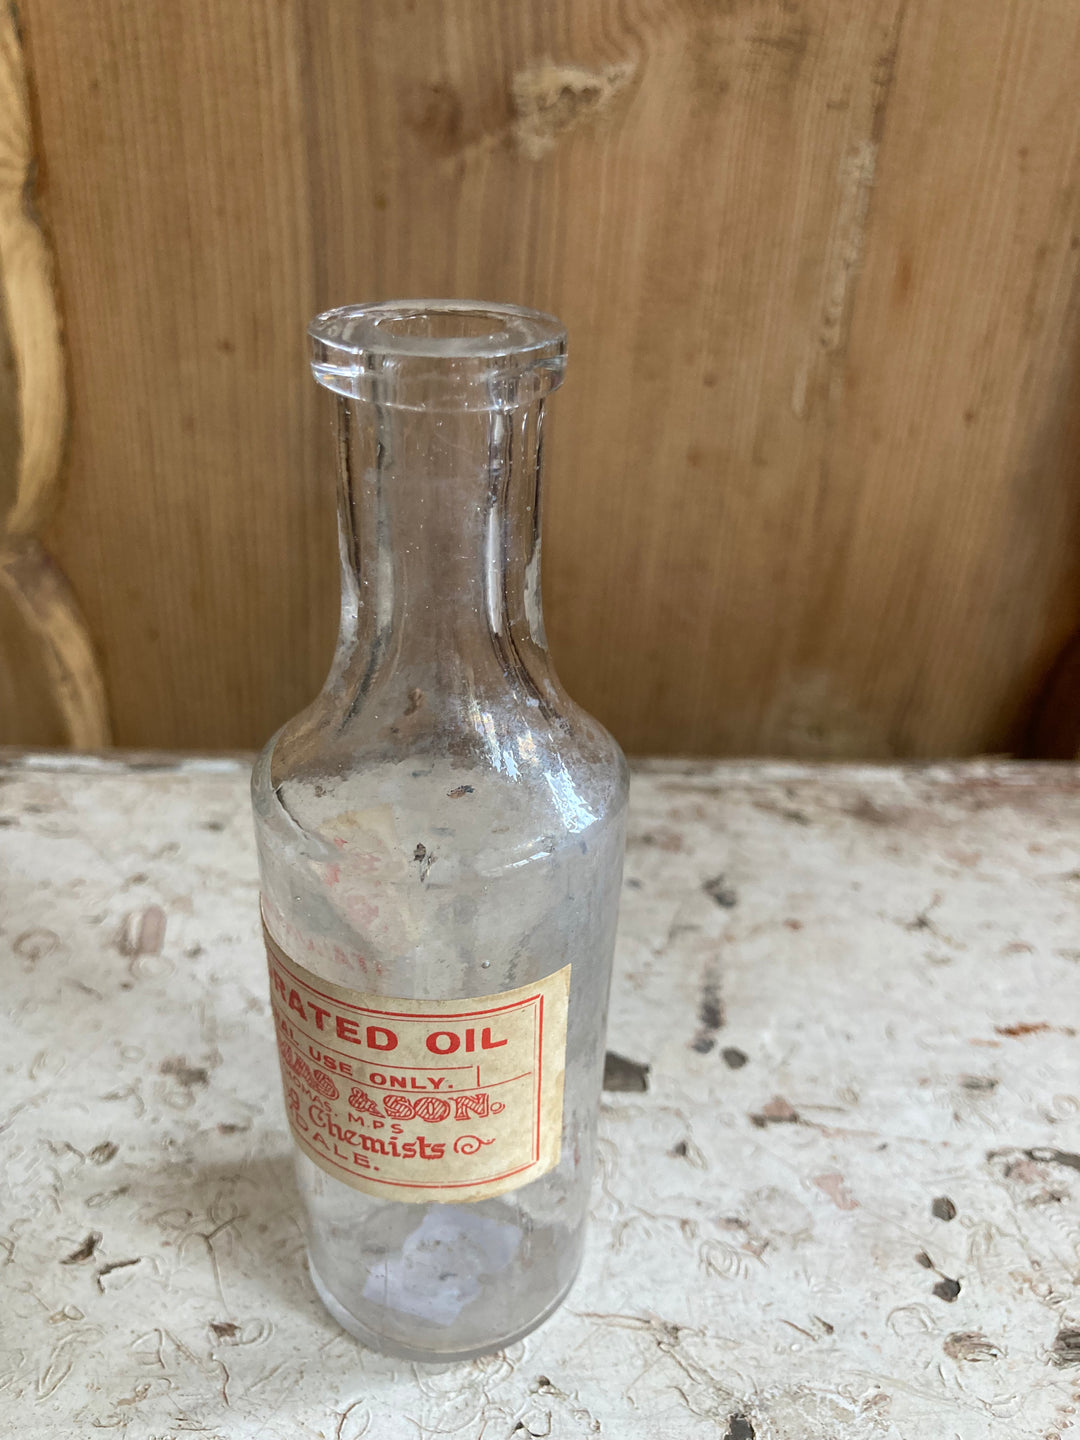 Camphorated Oil Apothecary bottle